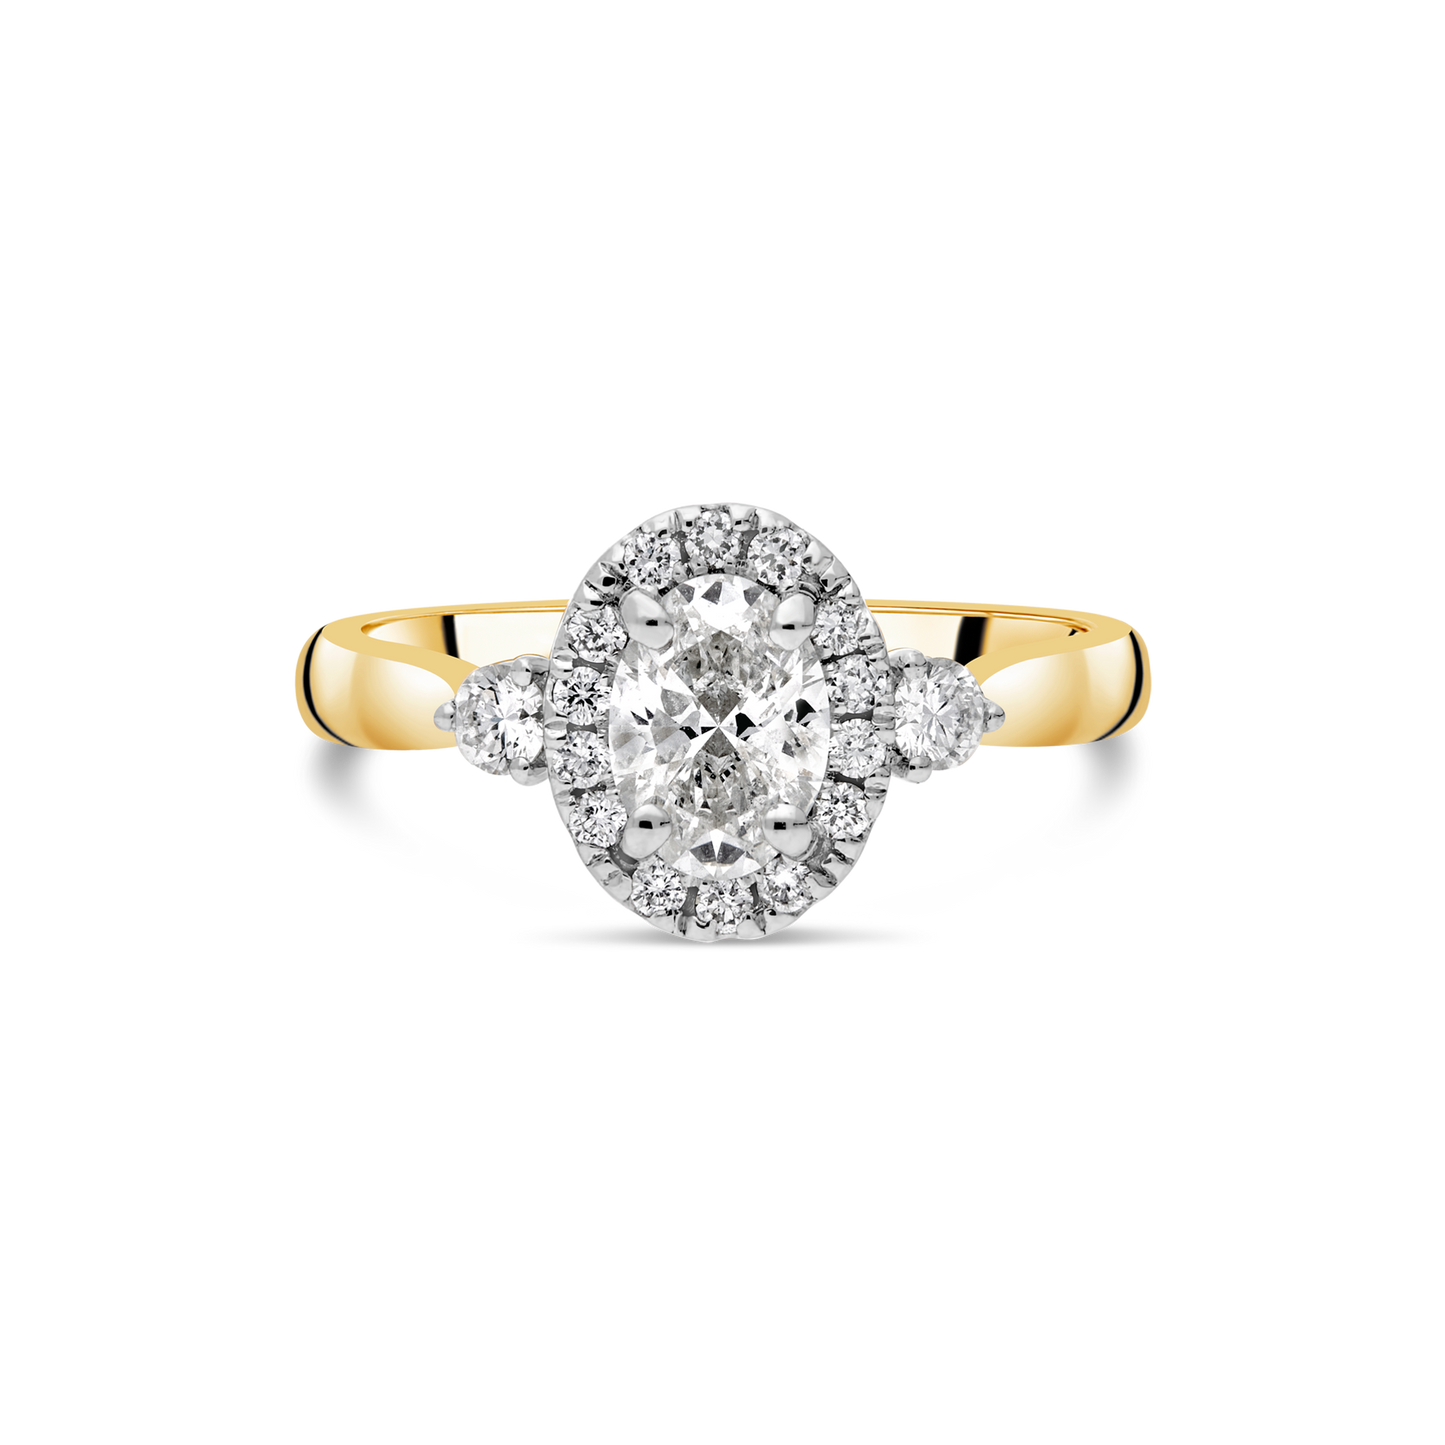 The "Maiden" Oval Diamond Ring with Sides